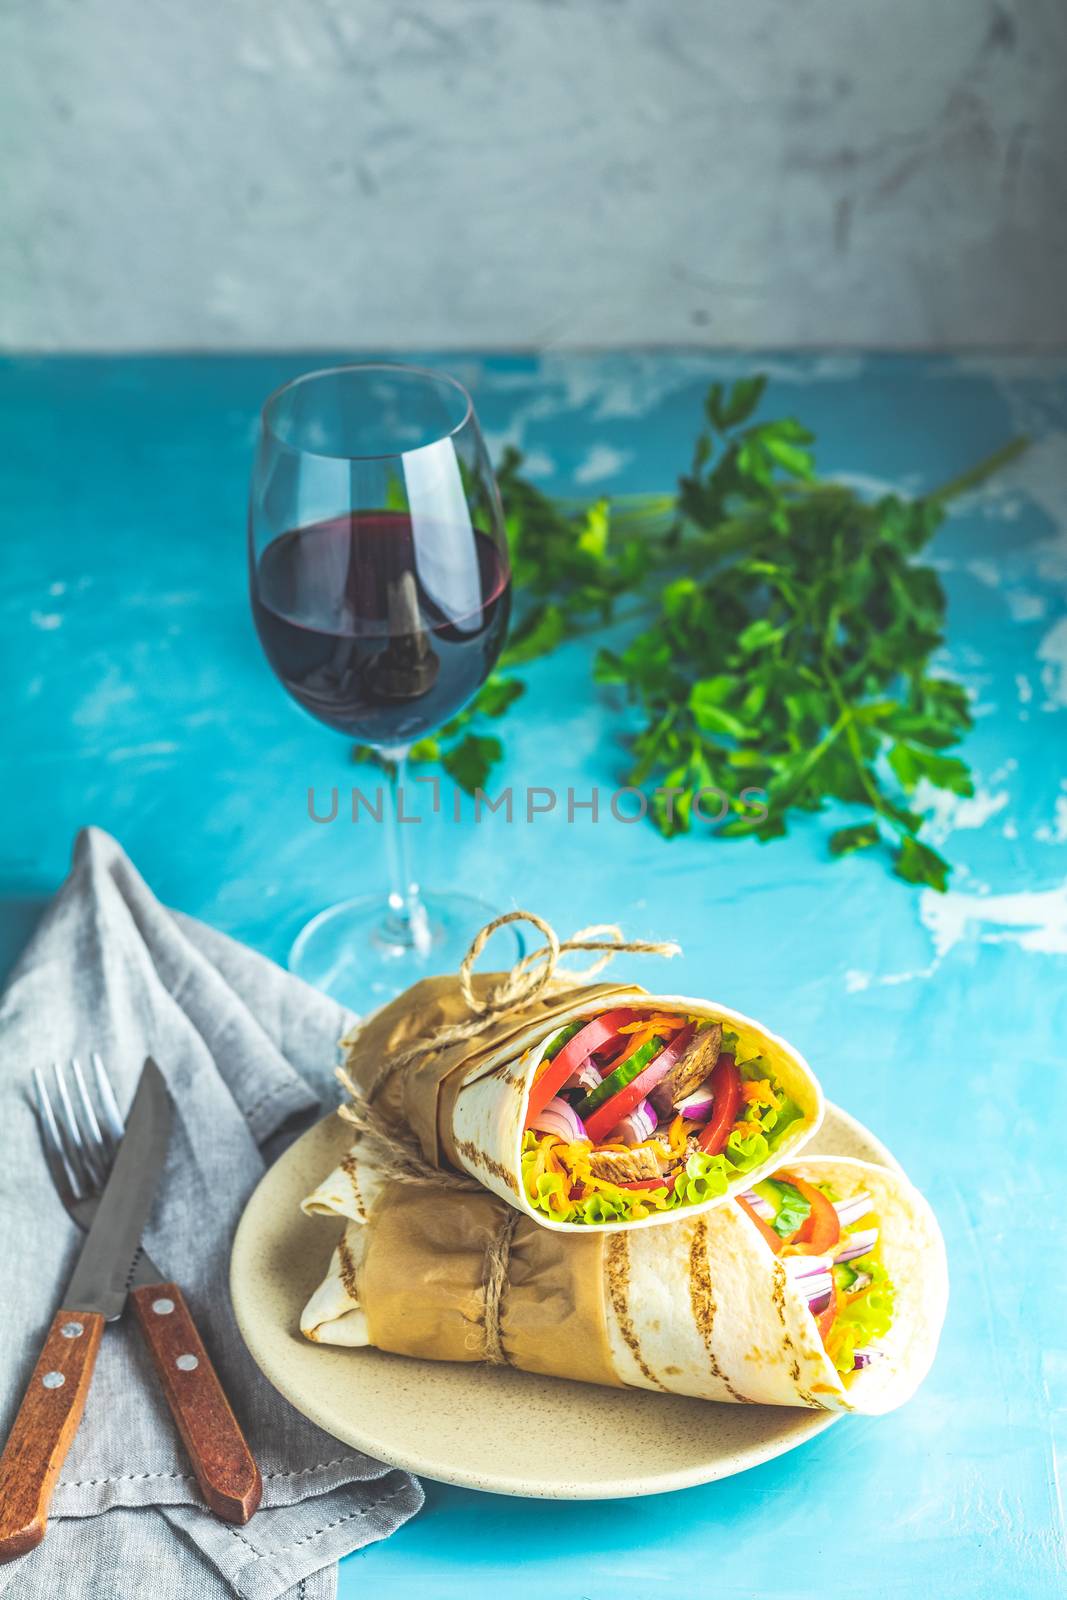 Traditional Middle Eastern snack served with wine by ArtSvitlyna